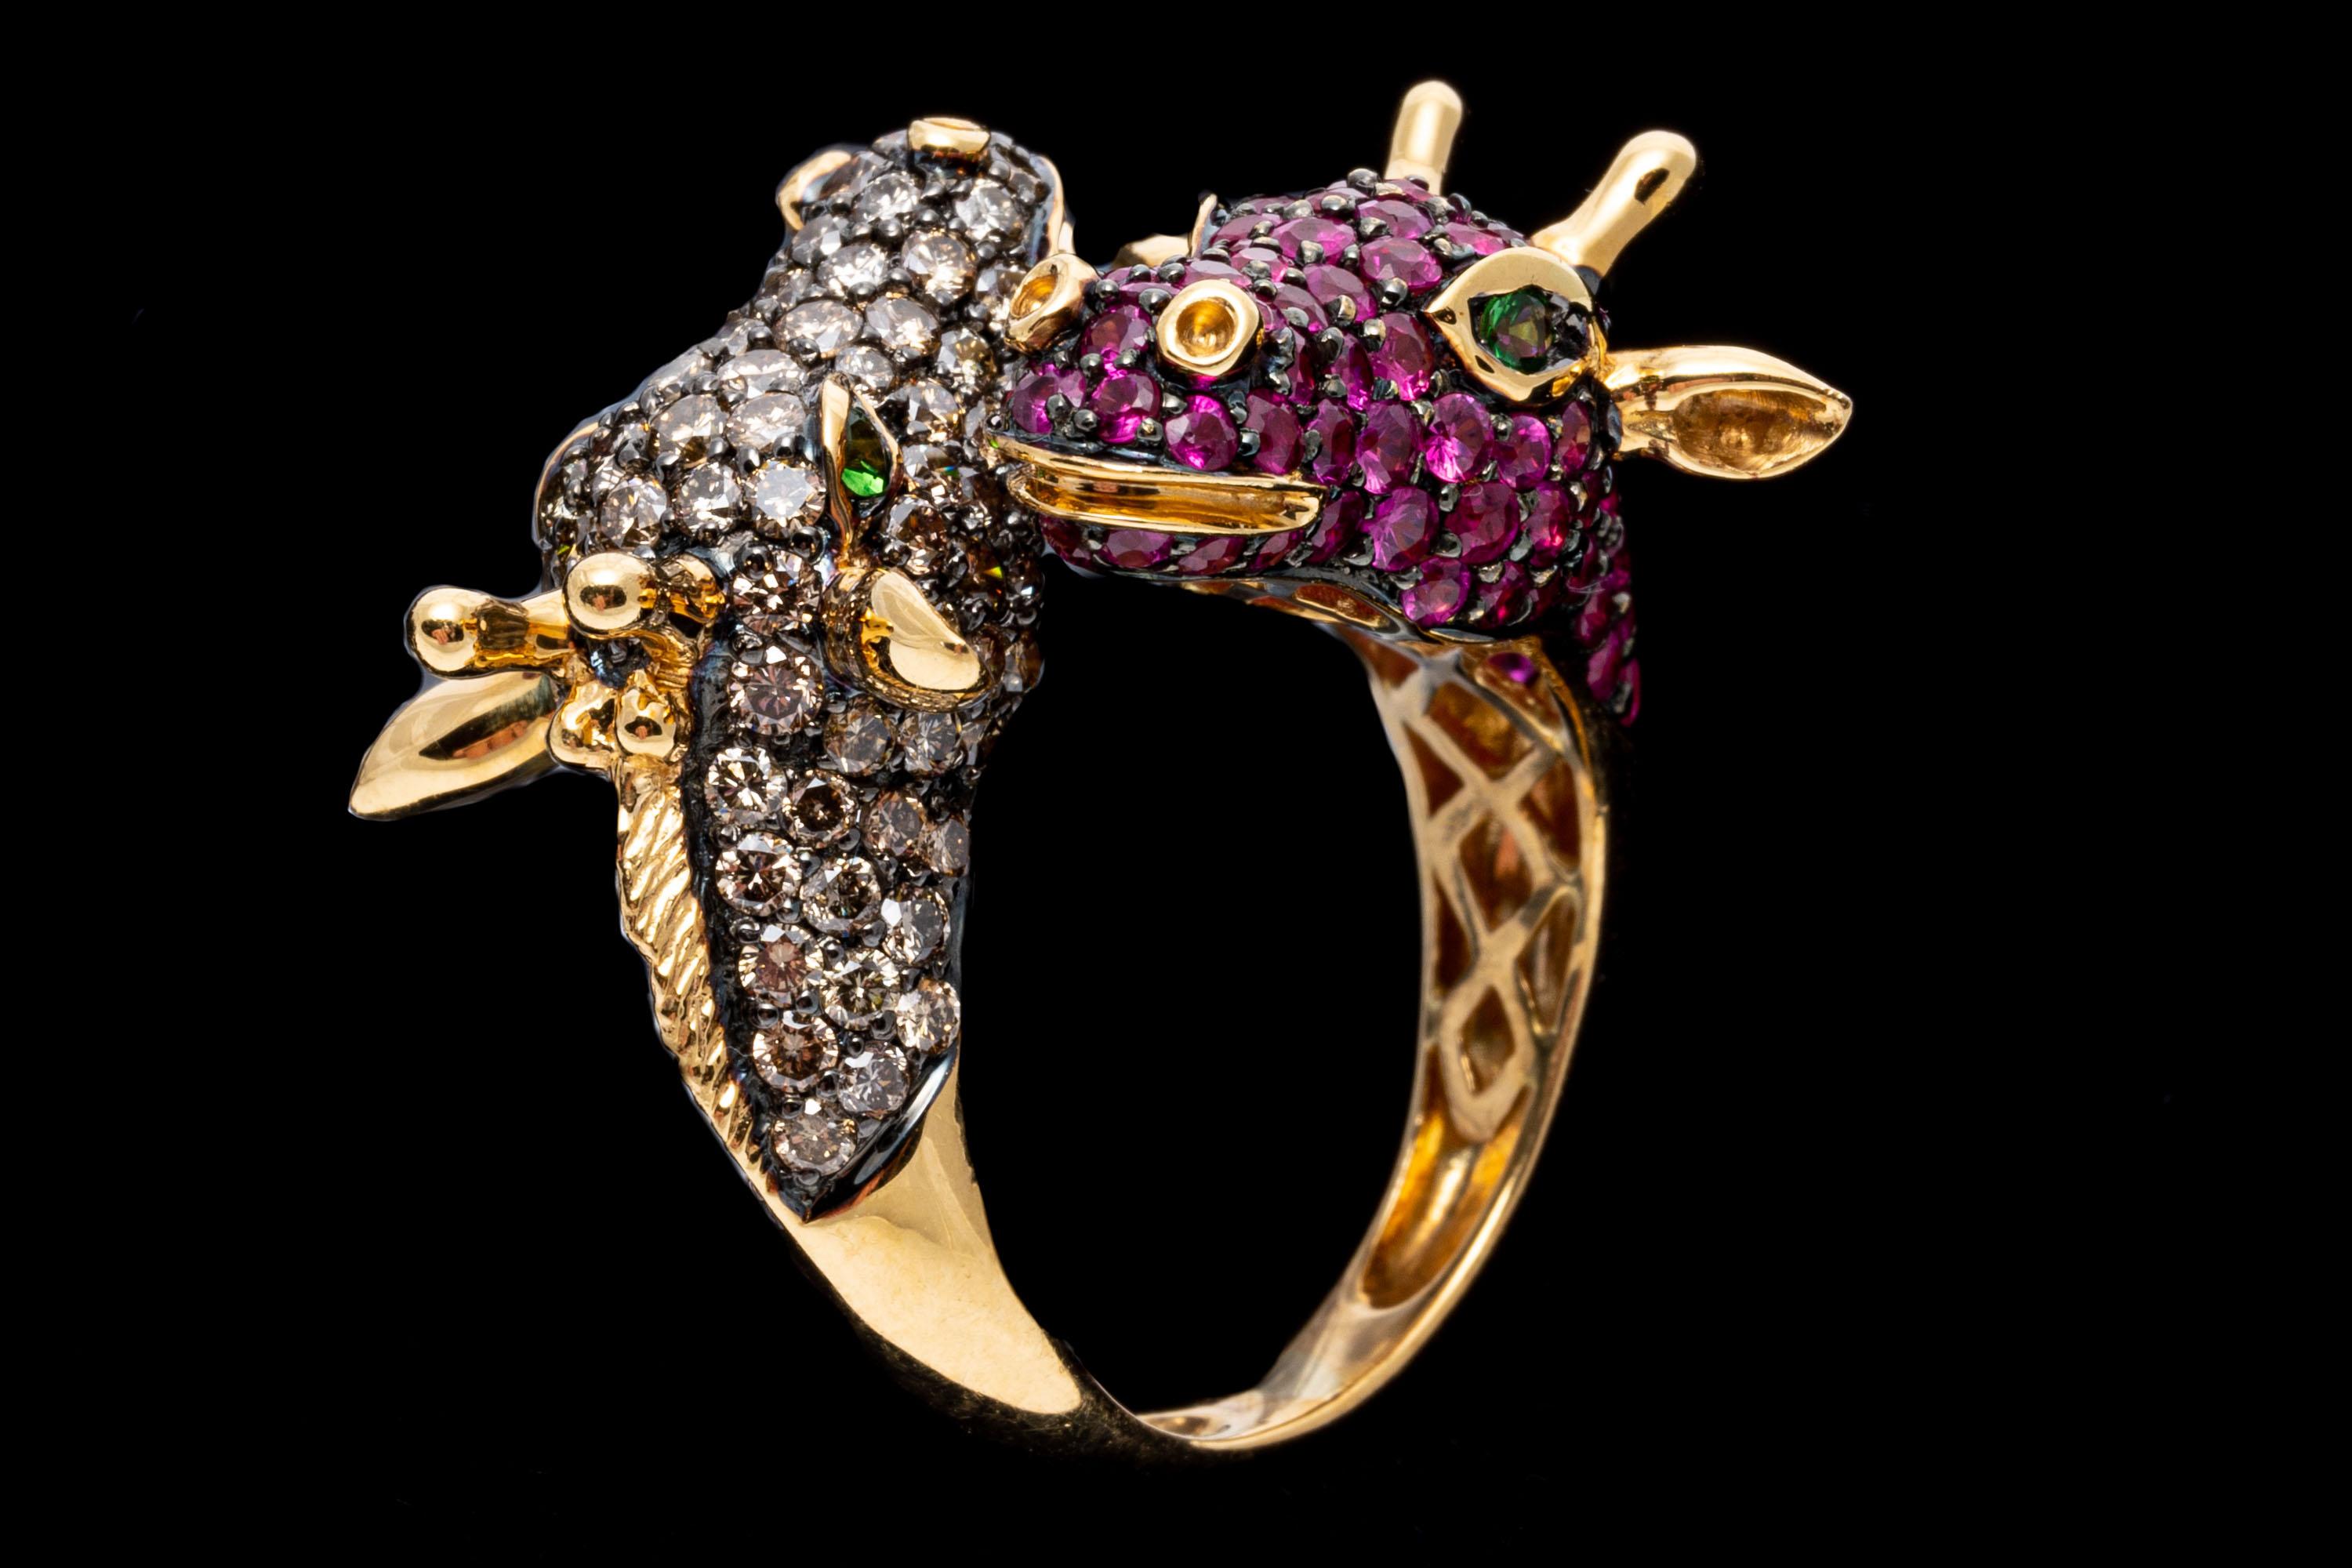 18k Gold Pave Set Cognac Diamond and Pink Sapphire Bypass Giraffes Ring For Sale 3